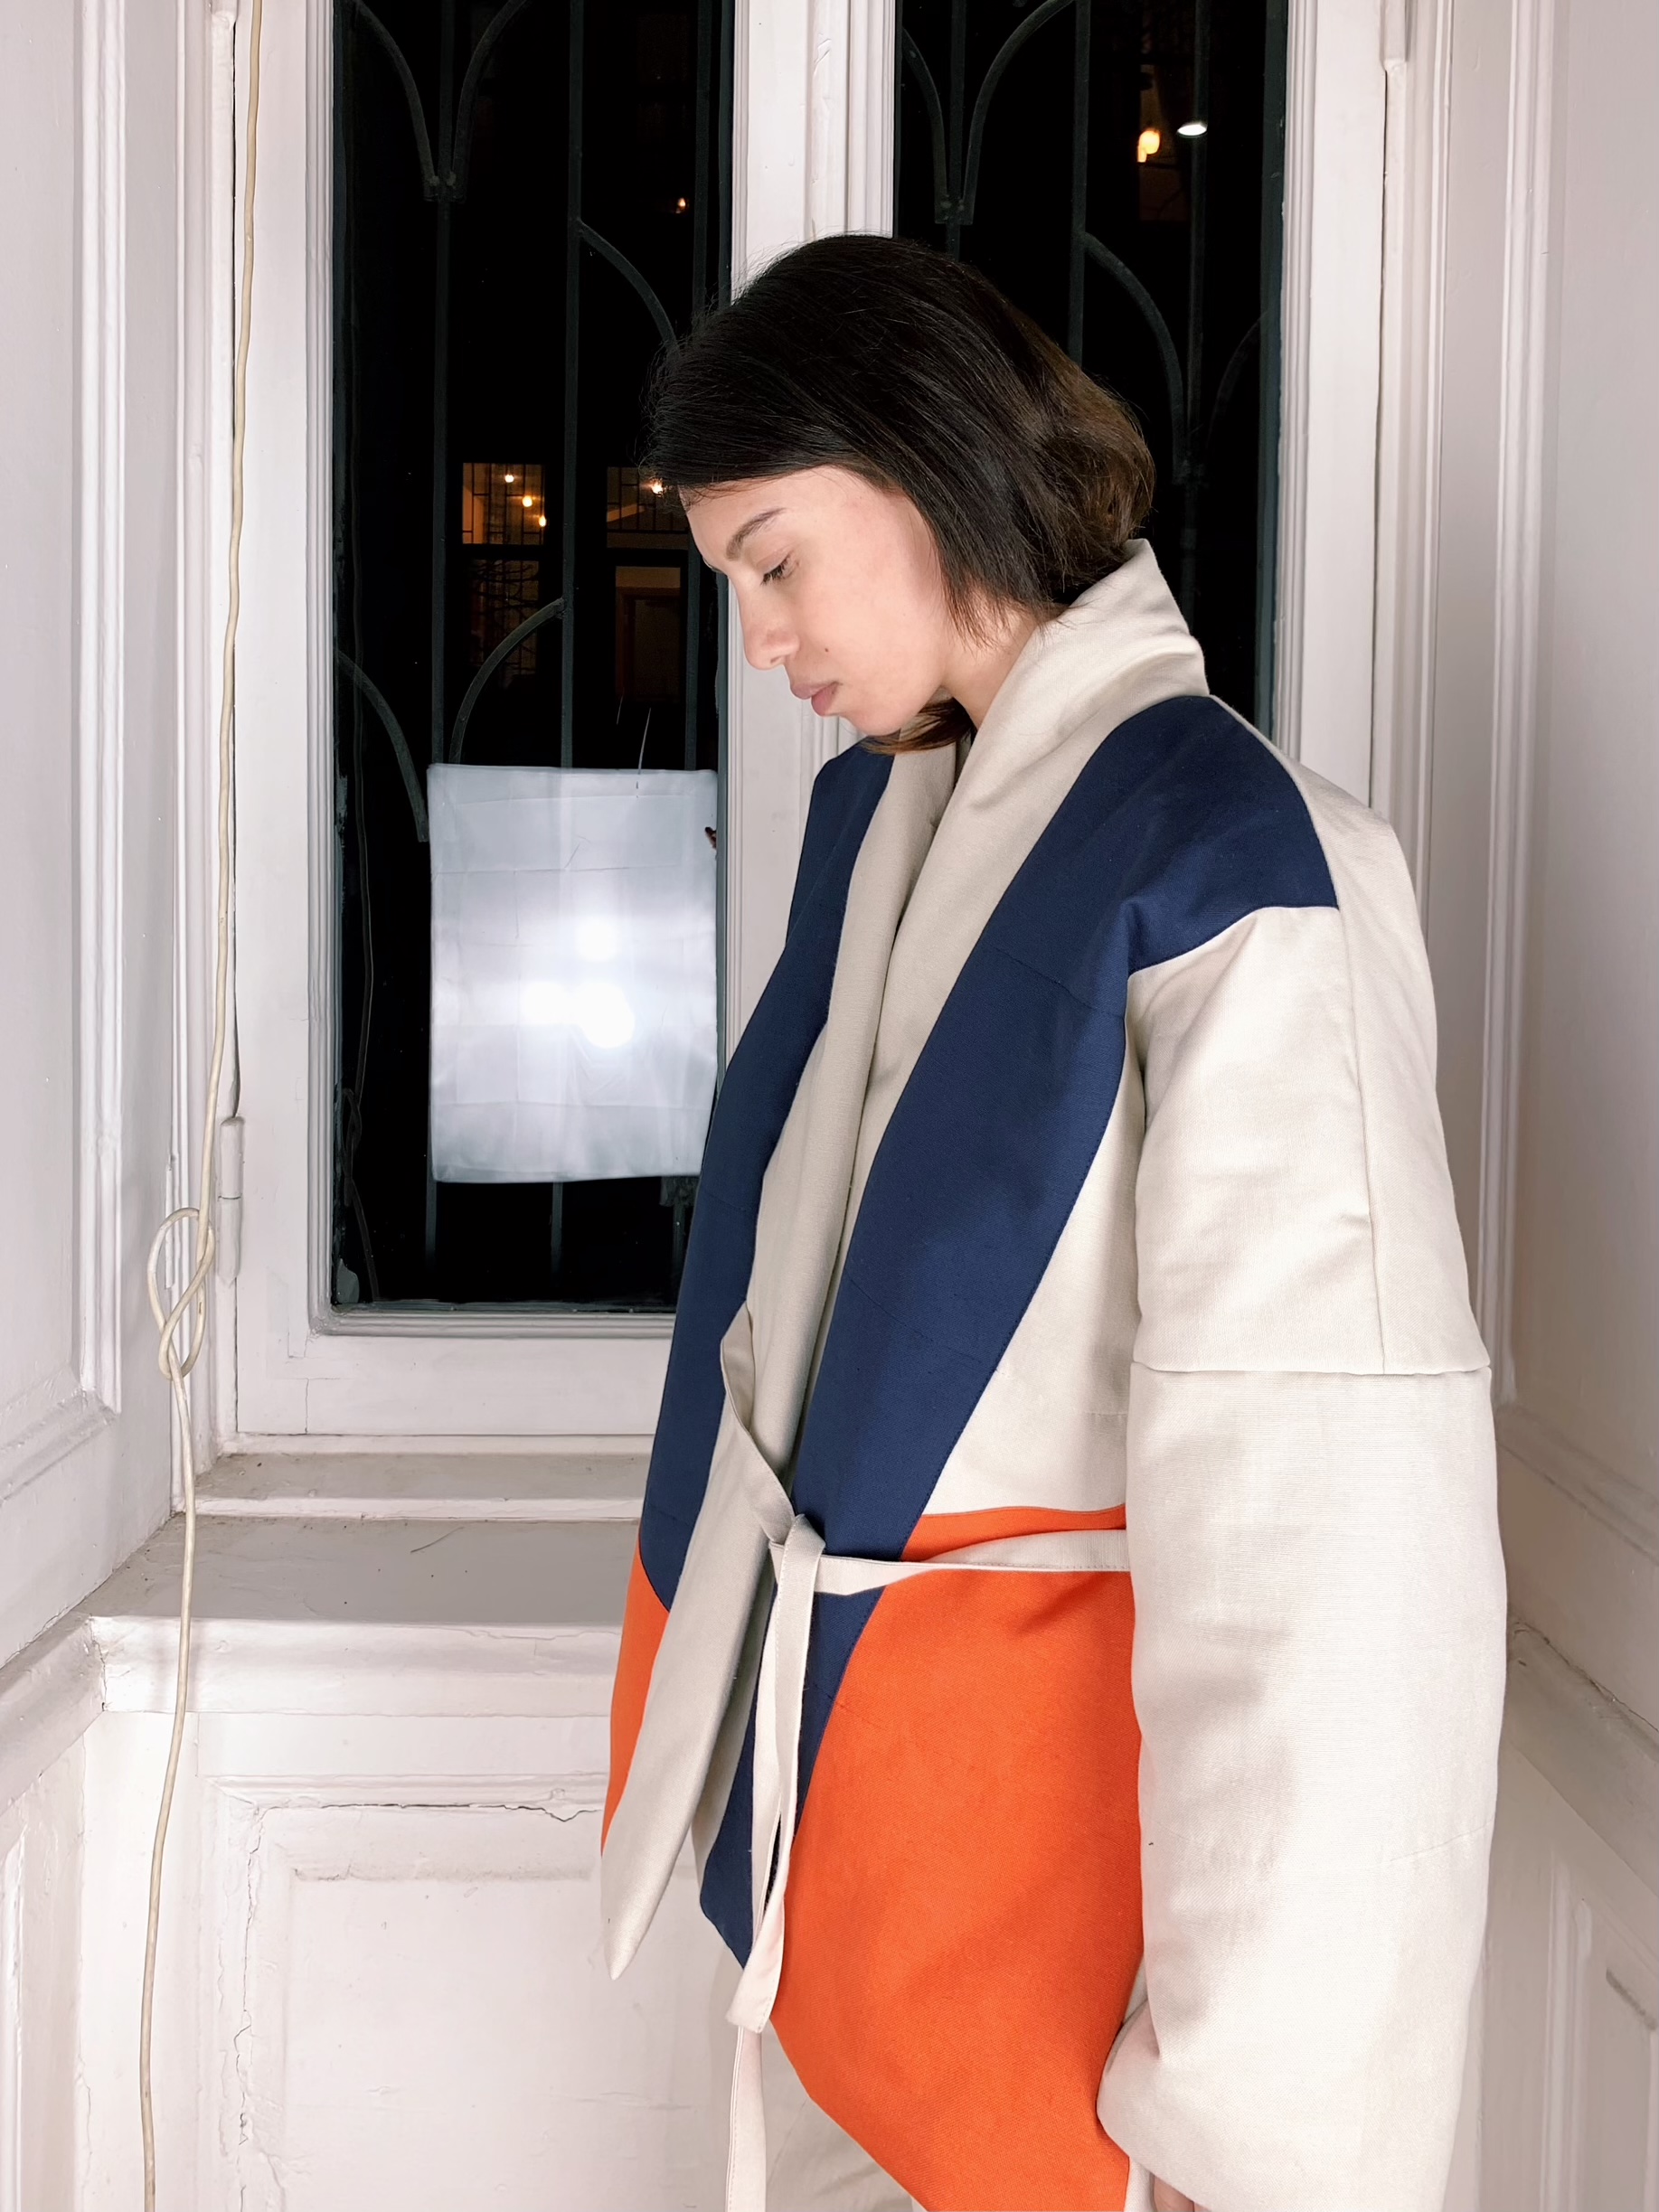 MULTICOLORED WINTER KIMONO JACKET WITH BLUE DETAILS